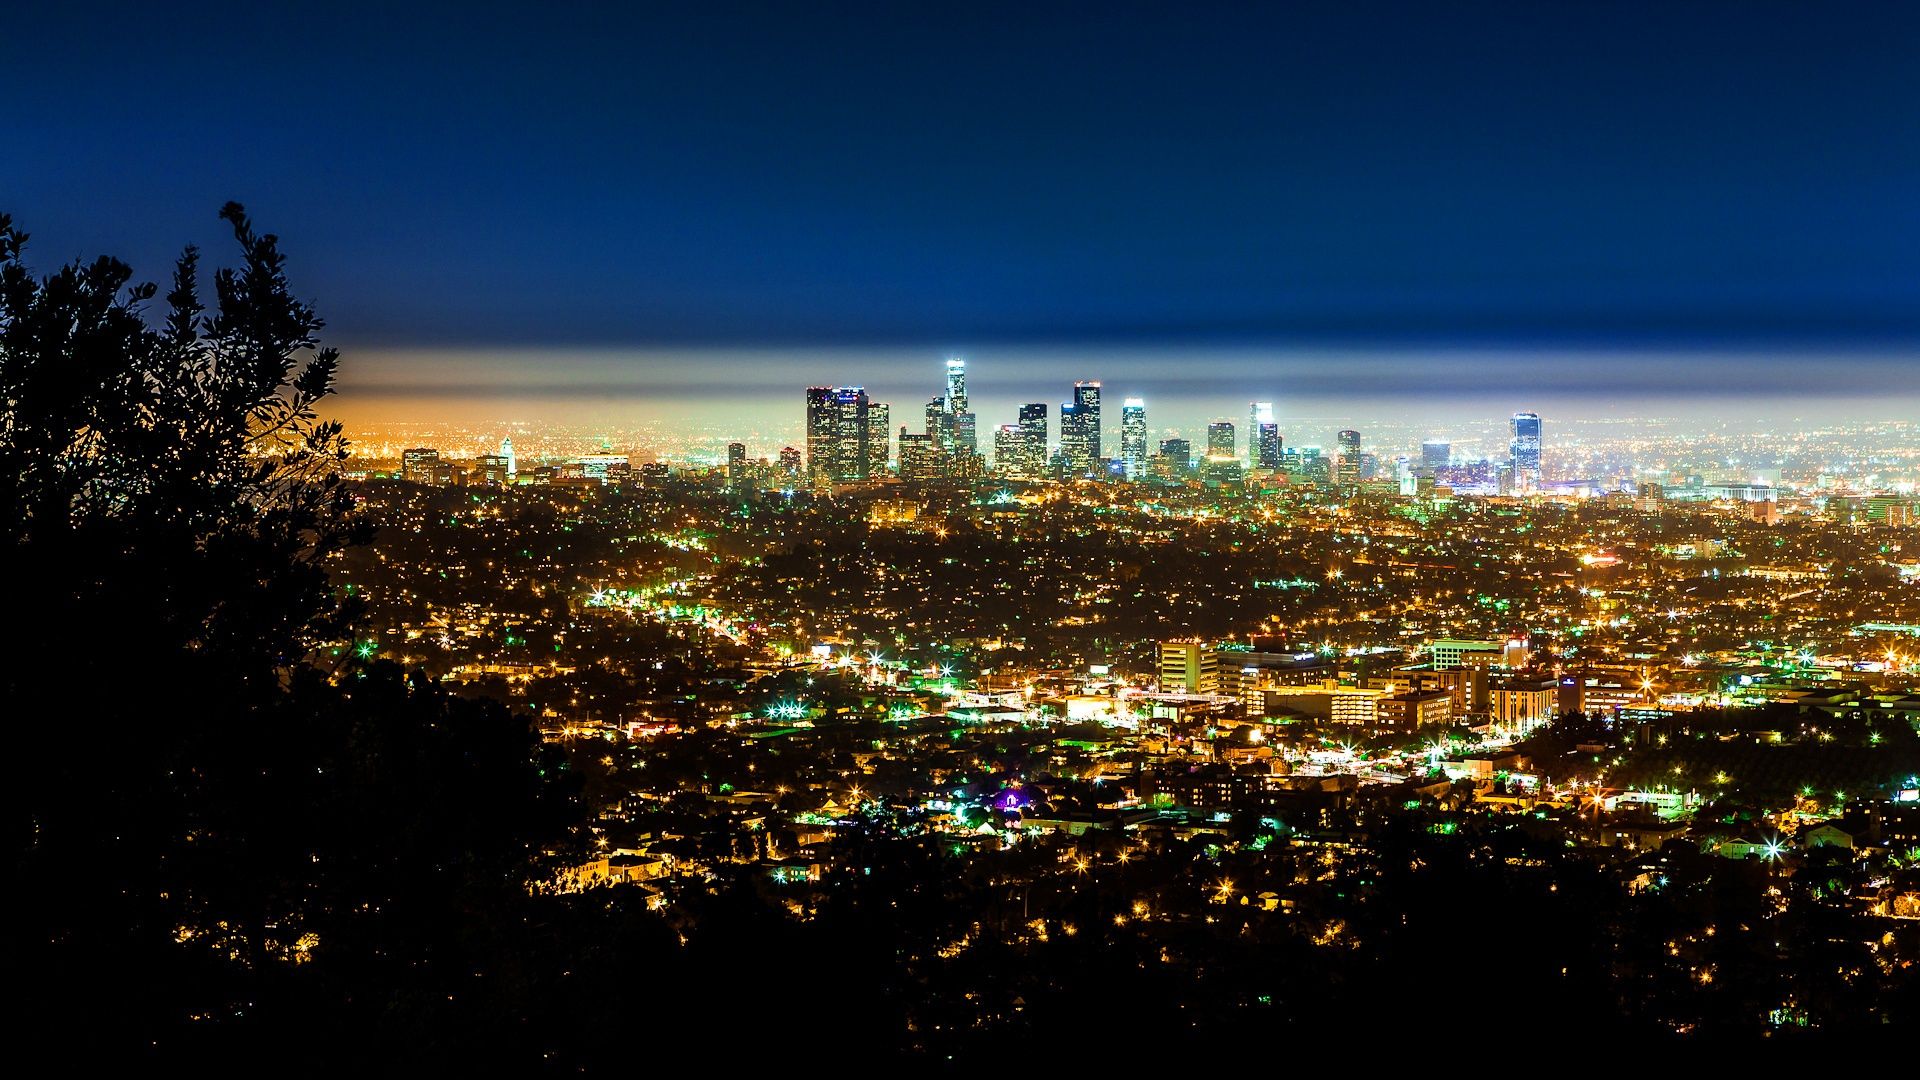 High Definition Los Angeles Wallpaper Image In 3D For Download